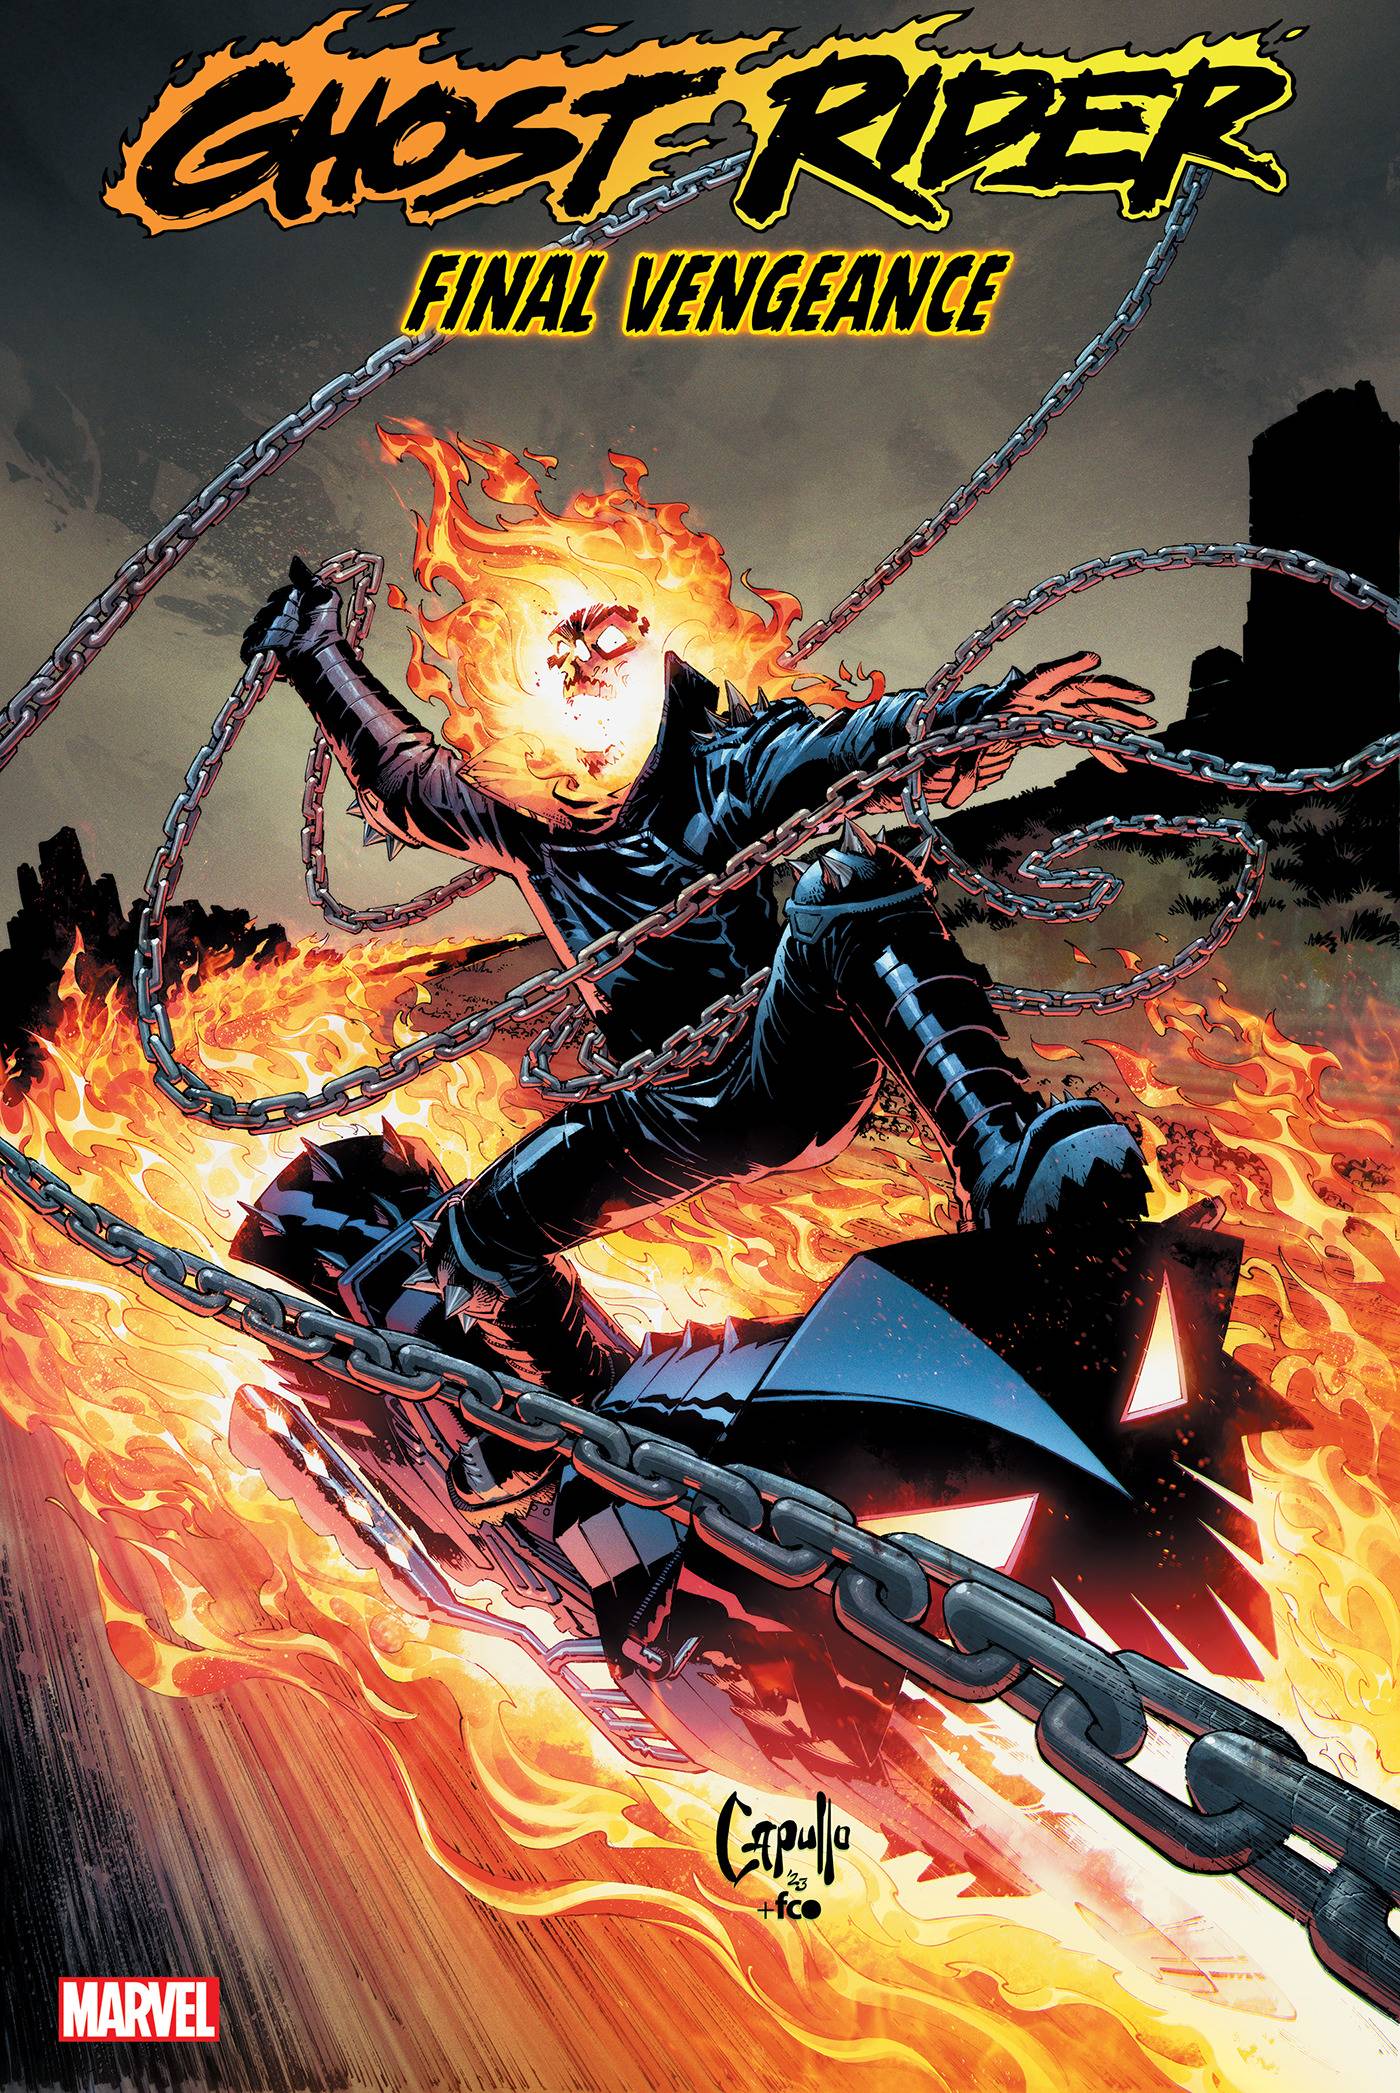 GHOST RIDER FINAL VENGEANCE #1 BY GREG CAPULLO POSTER